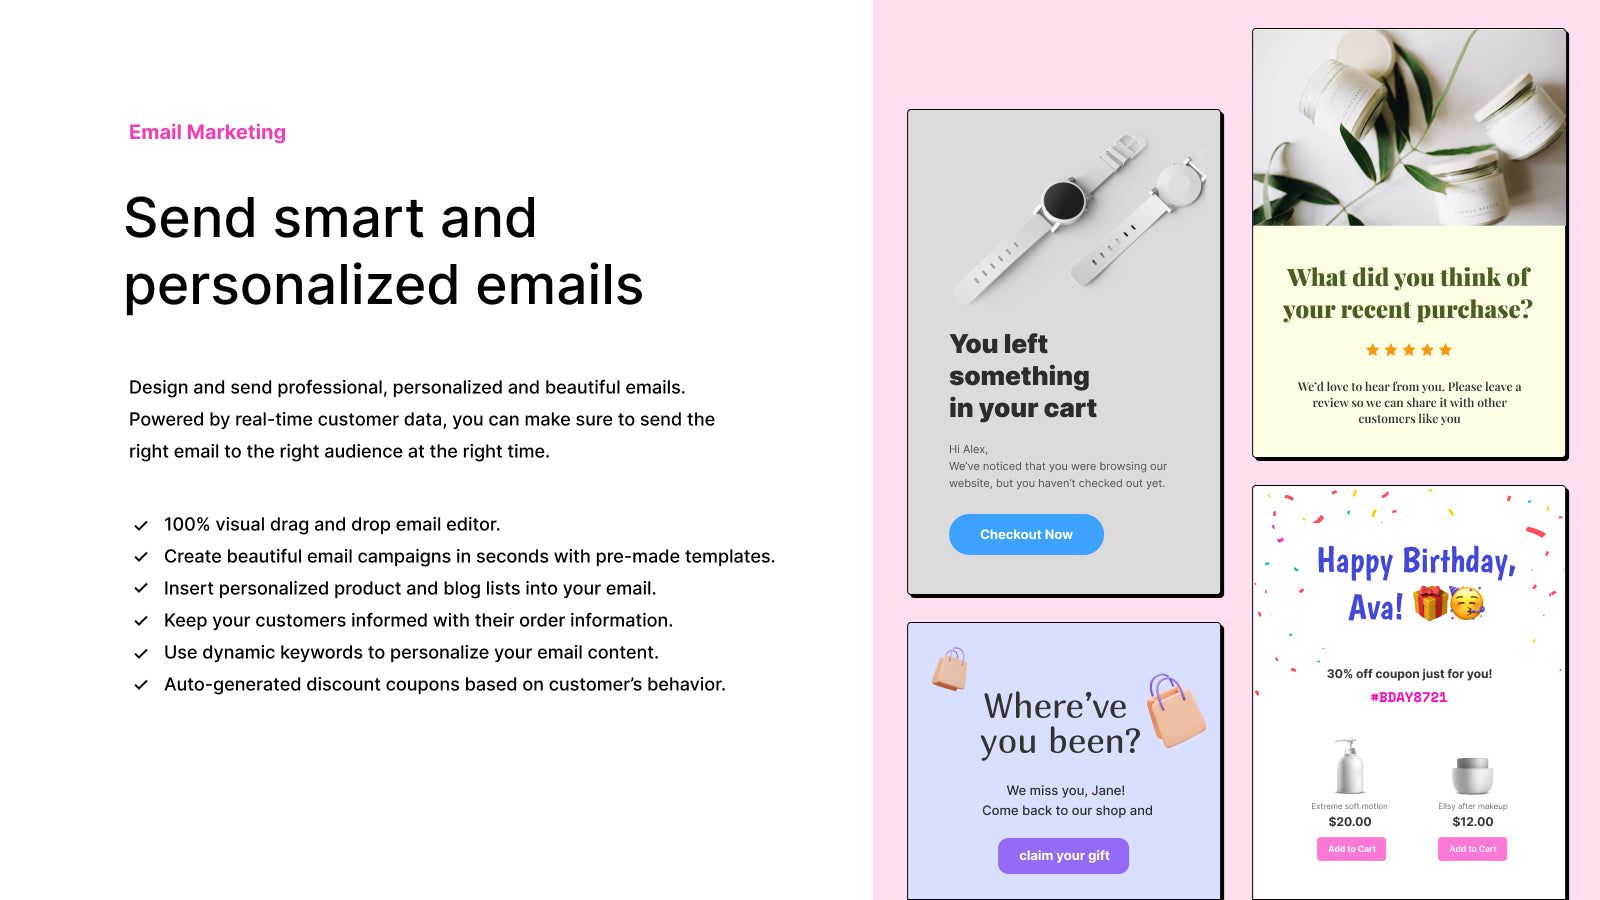 Send smart and personalized emails